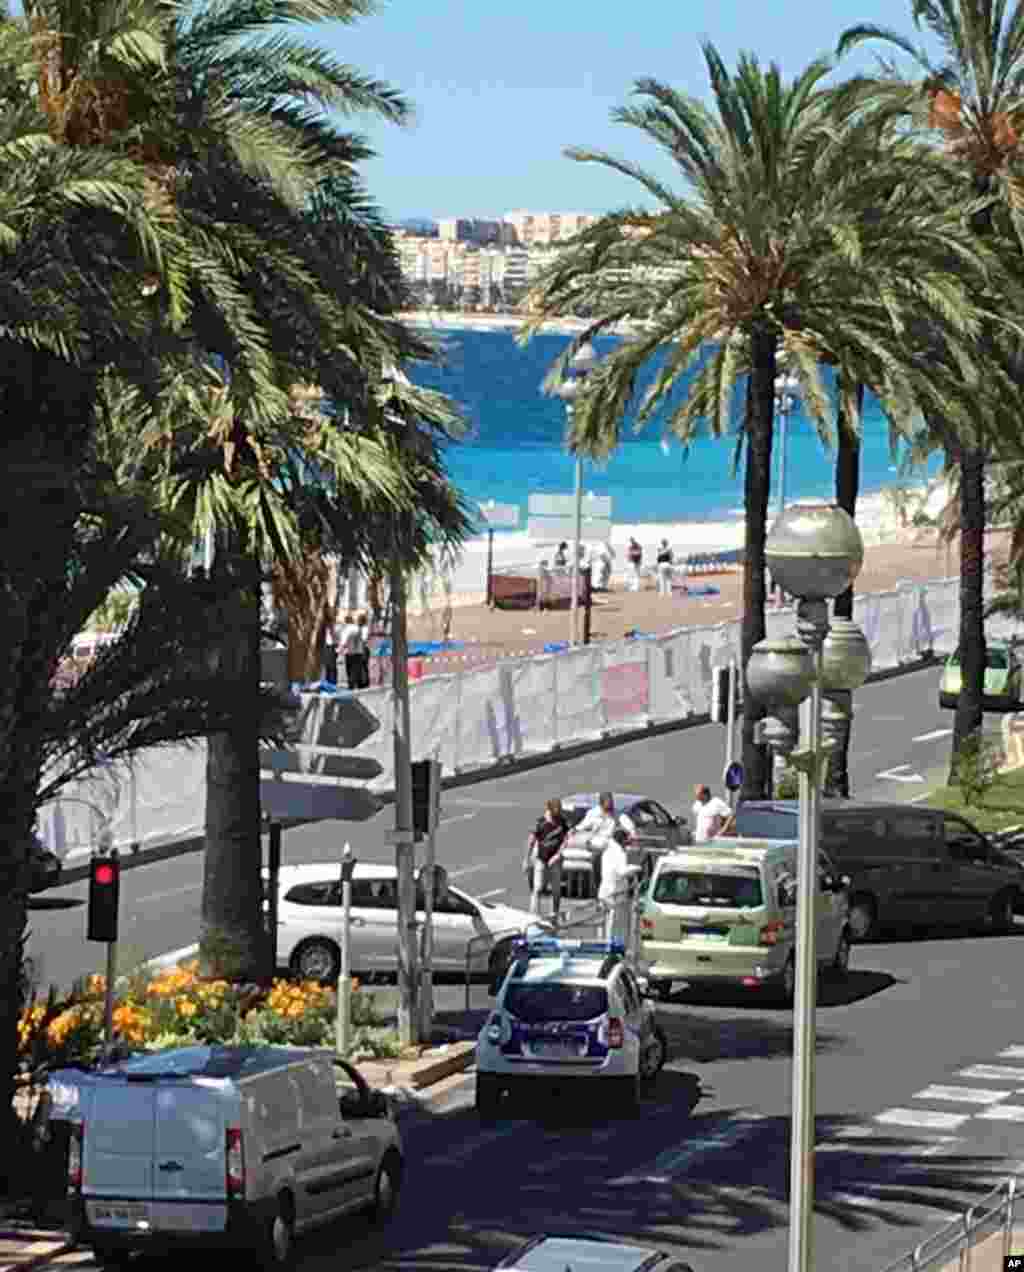 Forensic officials work on the beach next to the famed Promenade des Anglais, scene of the truck attack, in Nice, southern France on July 15, 2016.